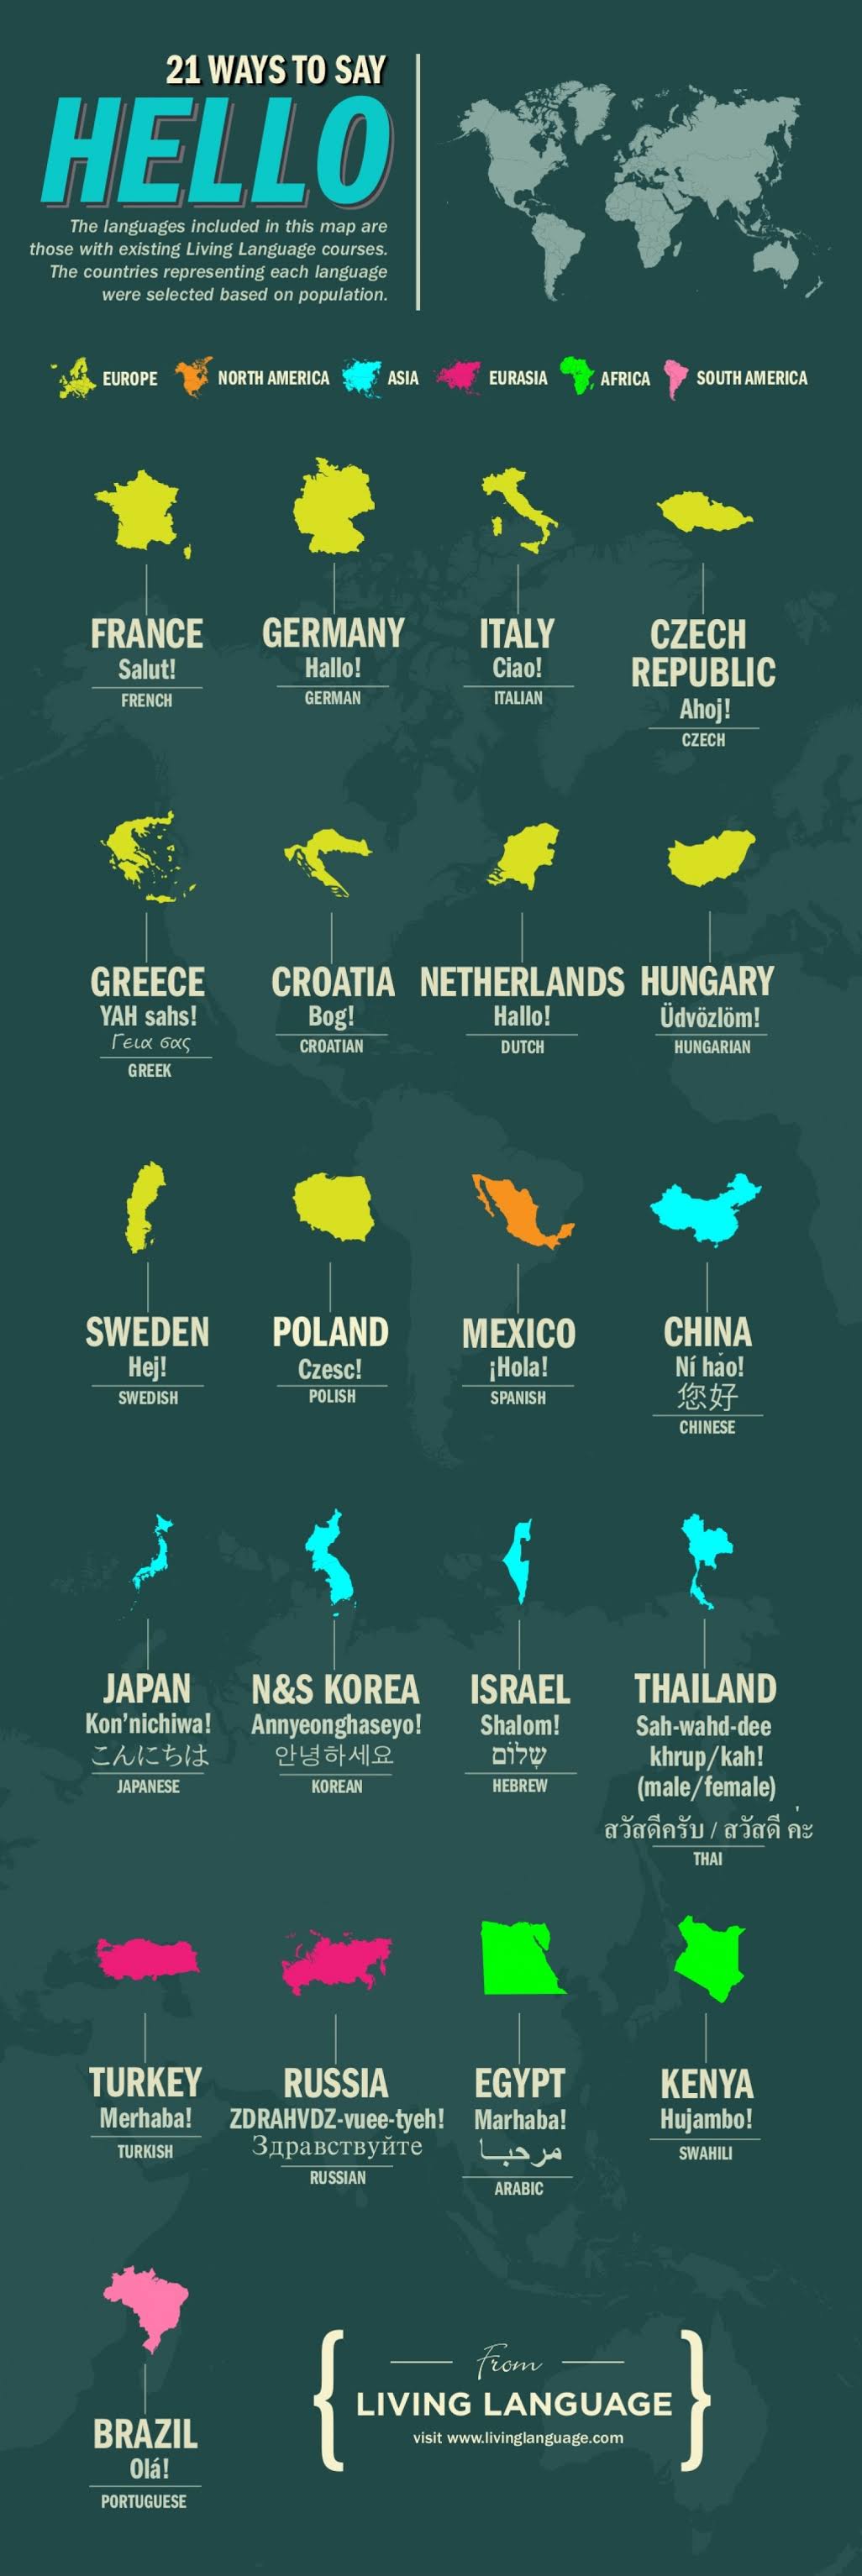 infographic-how-to-say-hello-in-21-different-languages-digital